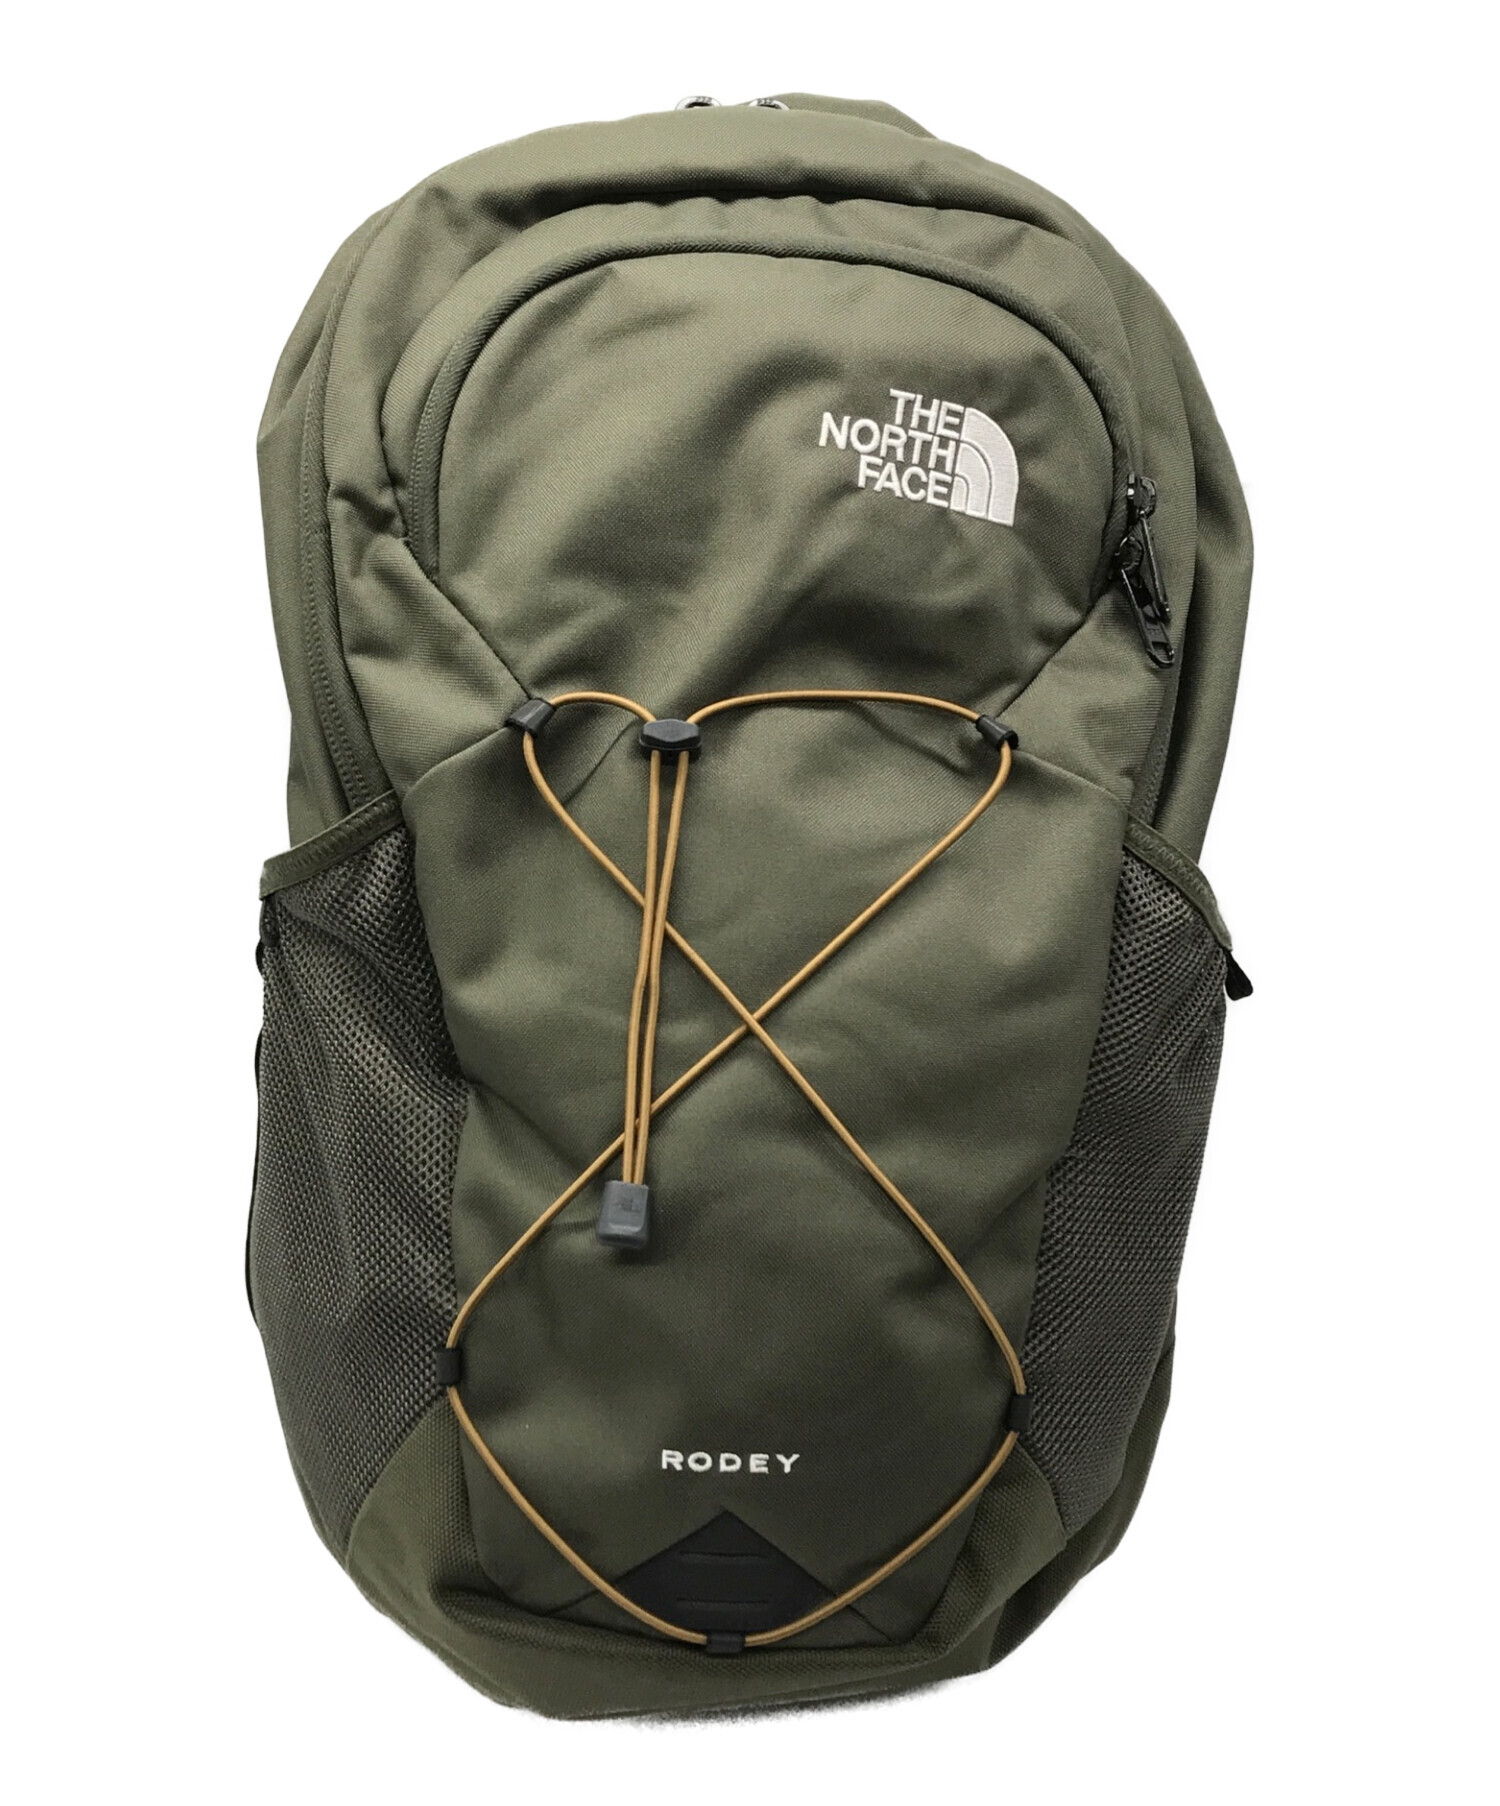 The North Face Backpack オリーブ